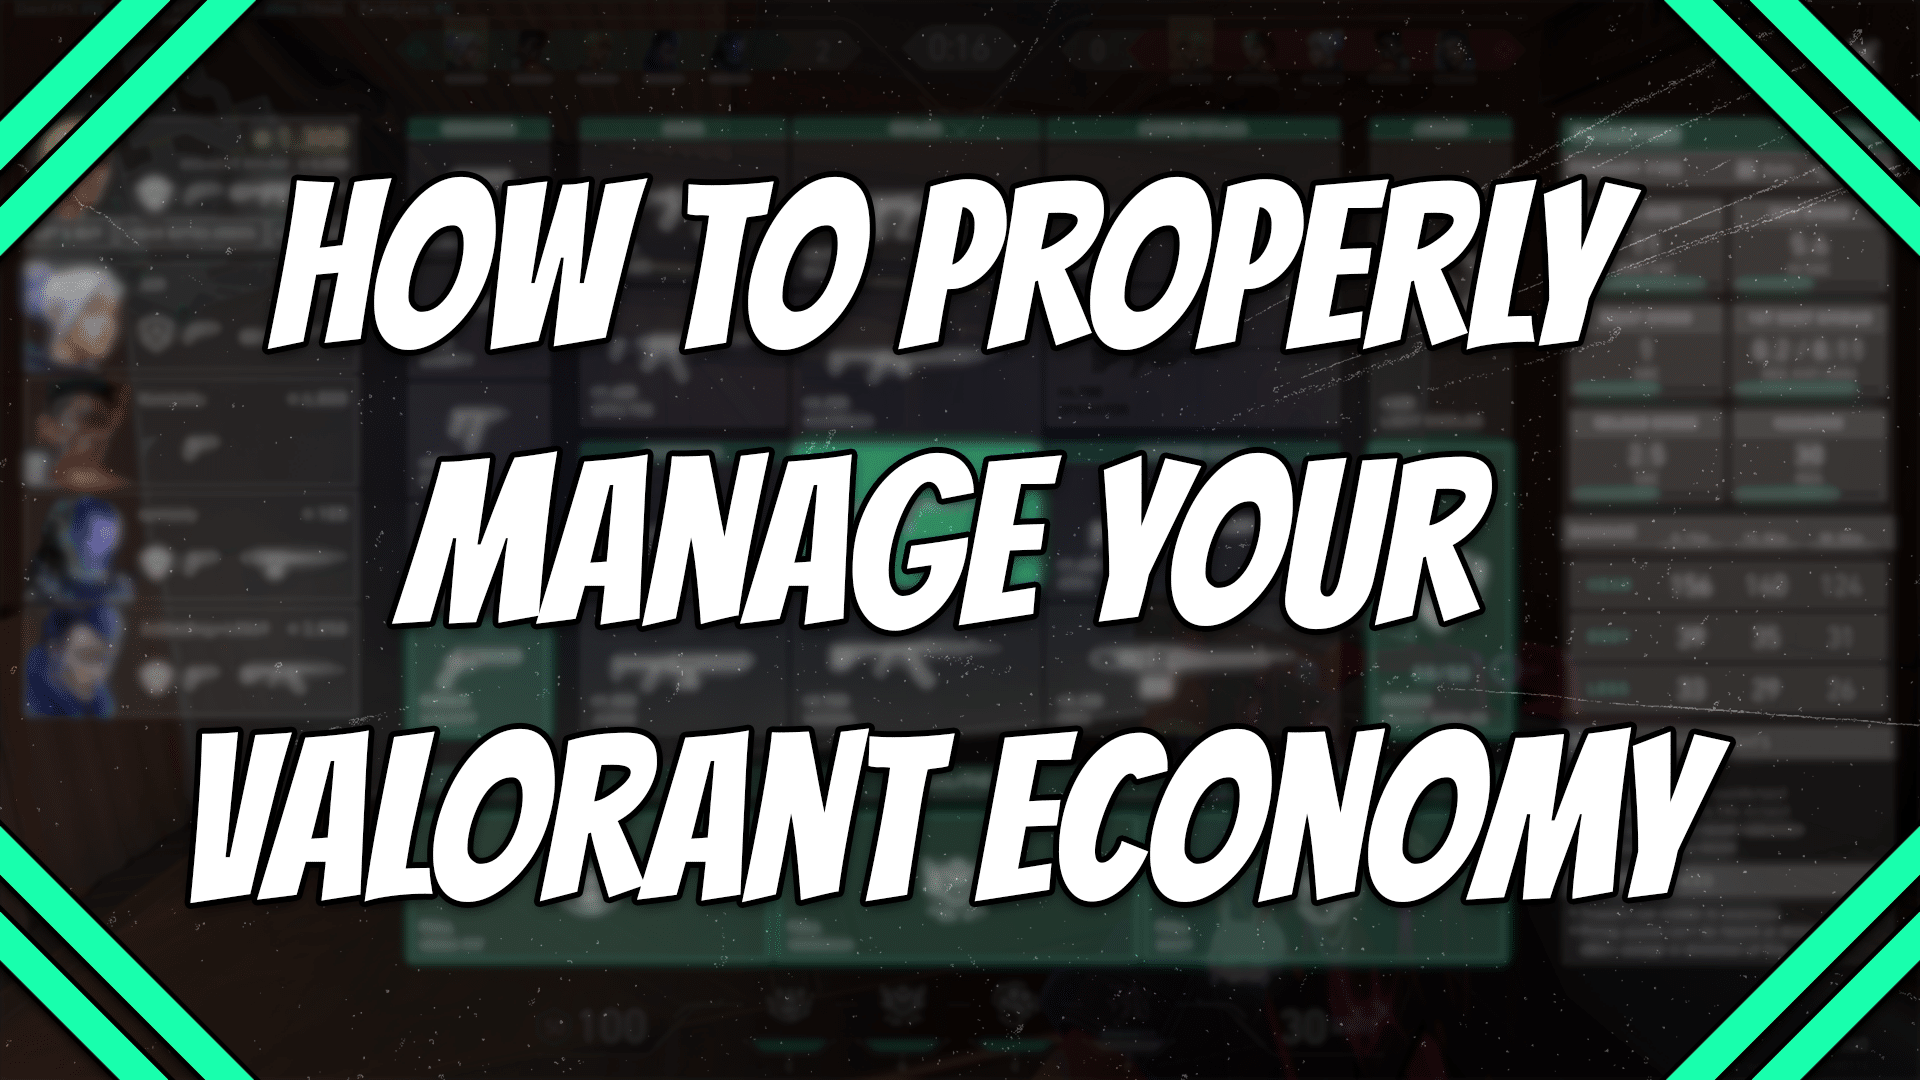 How to properly manage your Valorant economy title card